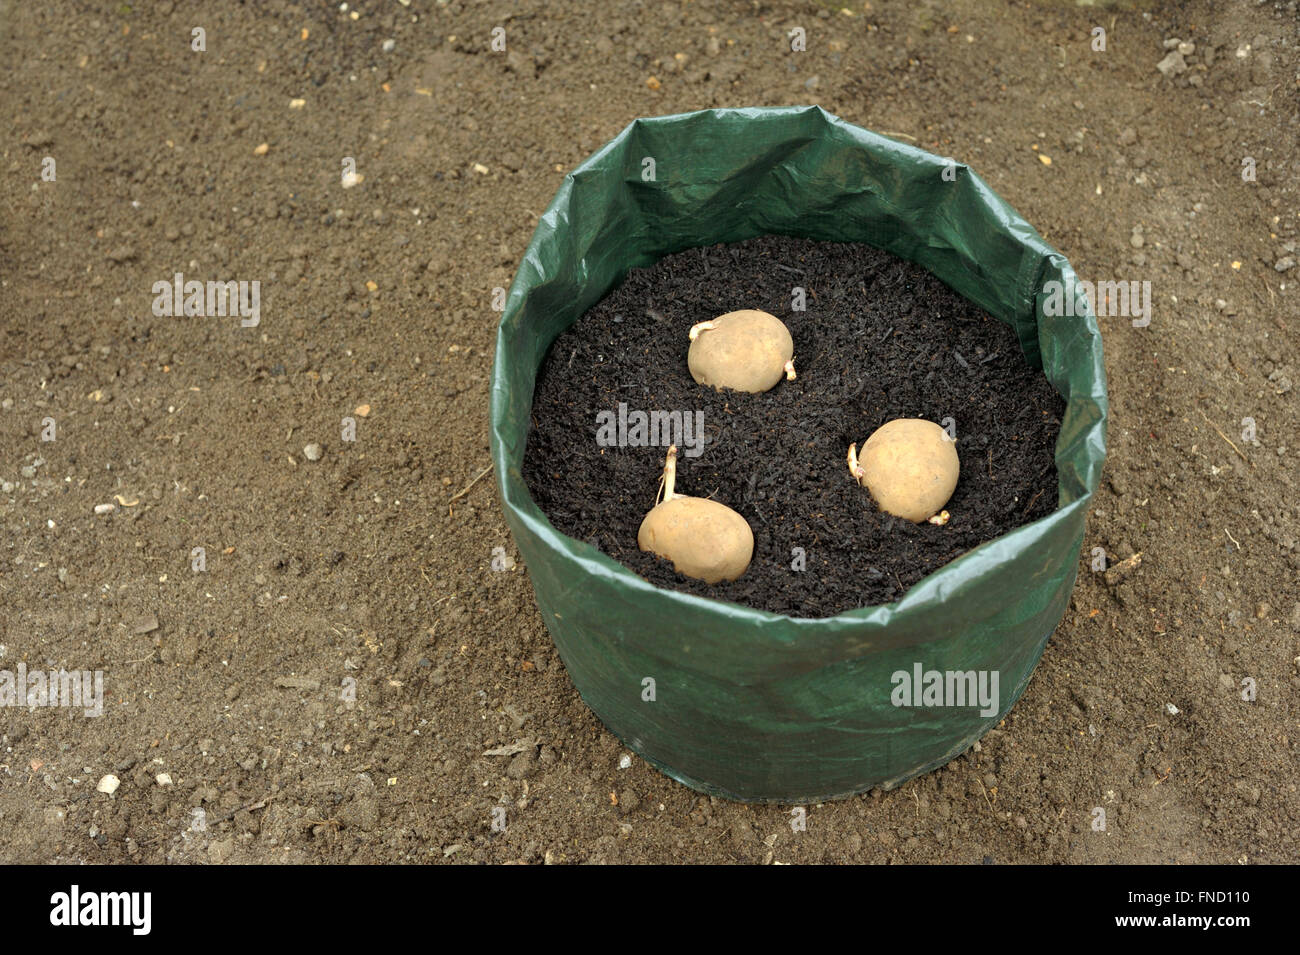 https://c8.alamy.com/comp/FND110/planting-seed-potatoes-in-a-growing-bag-container-of-compost-for-space-FND110.jpg